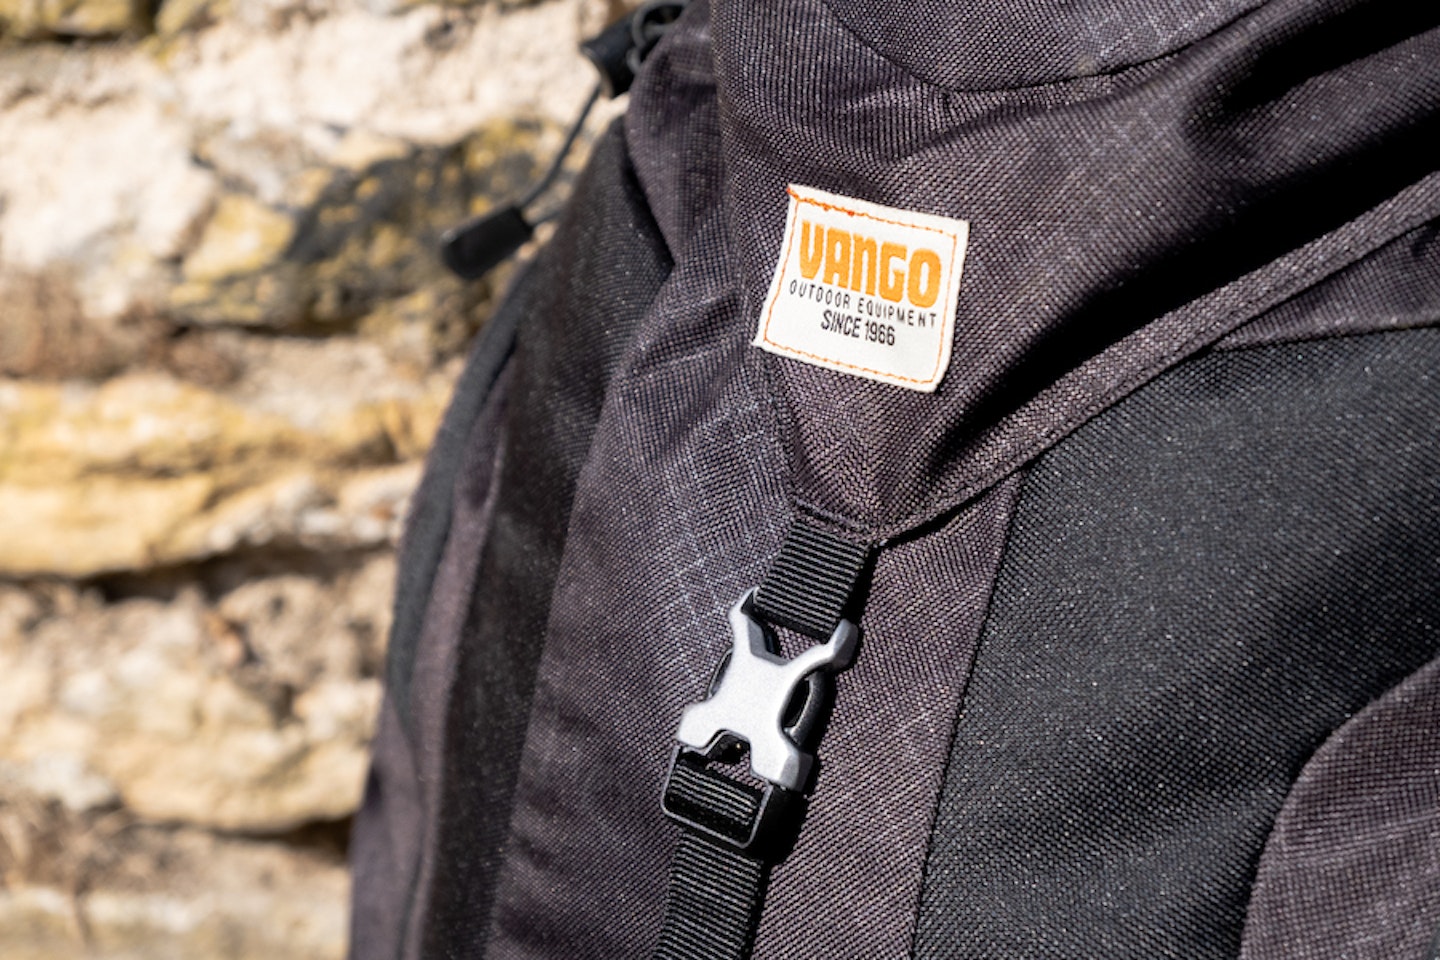 Vango Trail 35 logo and buckle close-up - note the grid pattern material